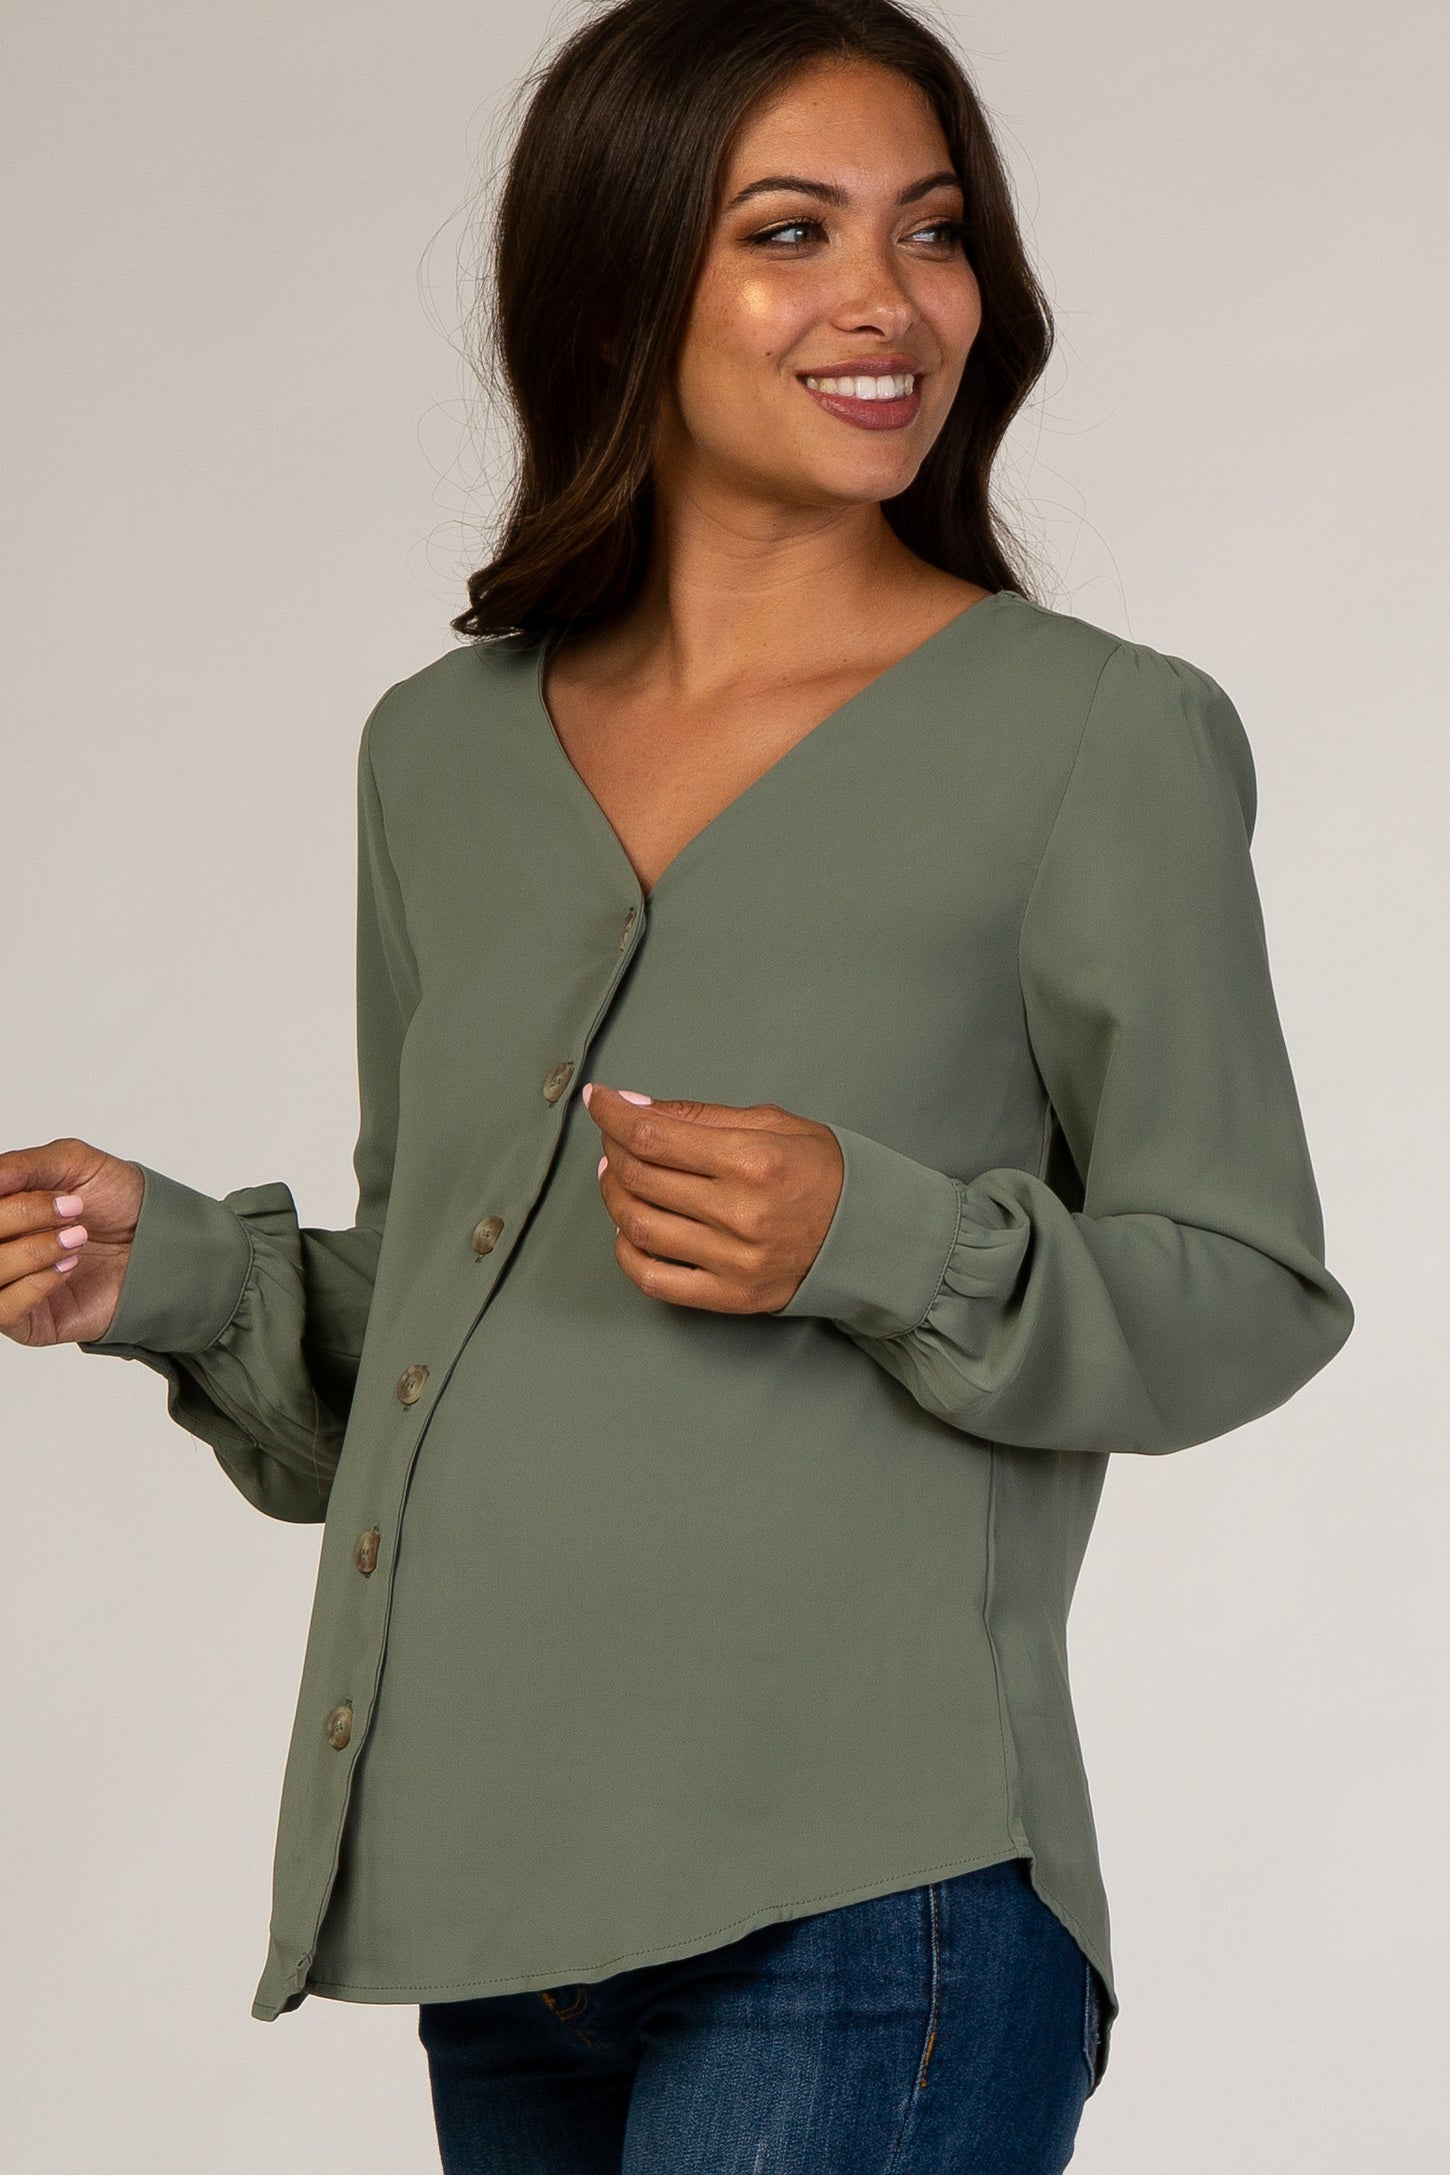 Olive Button Up Maternity Blouse